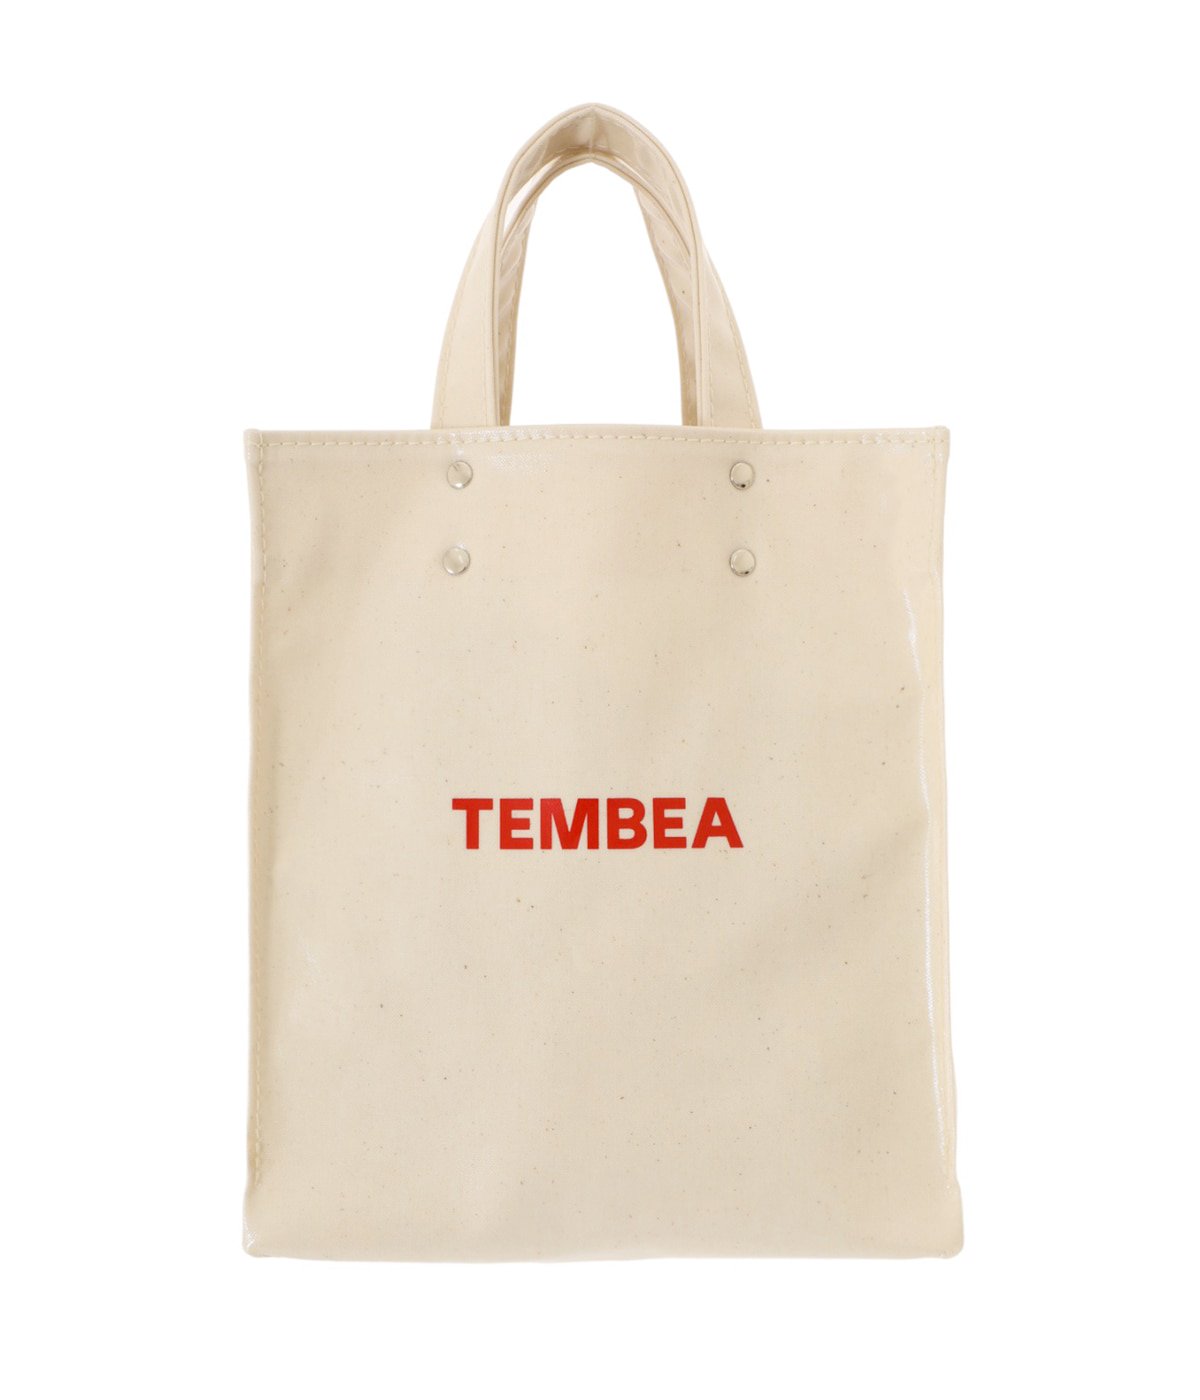 PAPER TOTE SMALL -NATURAL- | TEMBEA(テンベア) / バッグ トート 